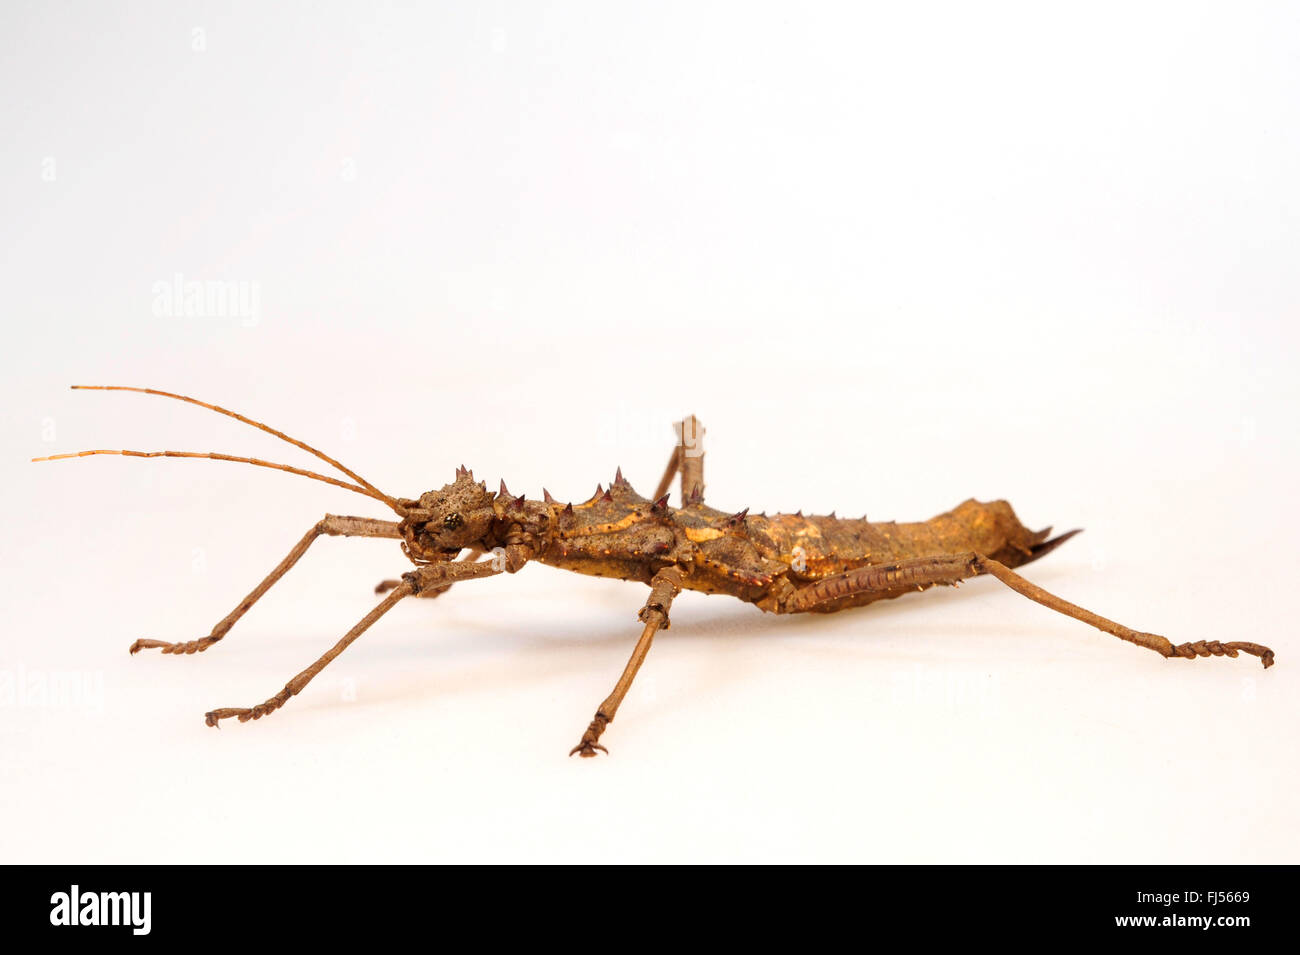 Thorny Stick Insect (Aretaon asperrimus), female, cut-out Stock Photo